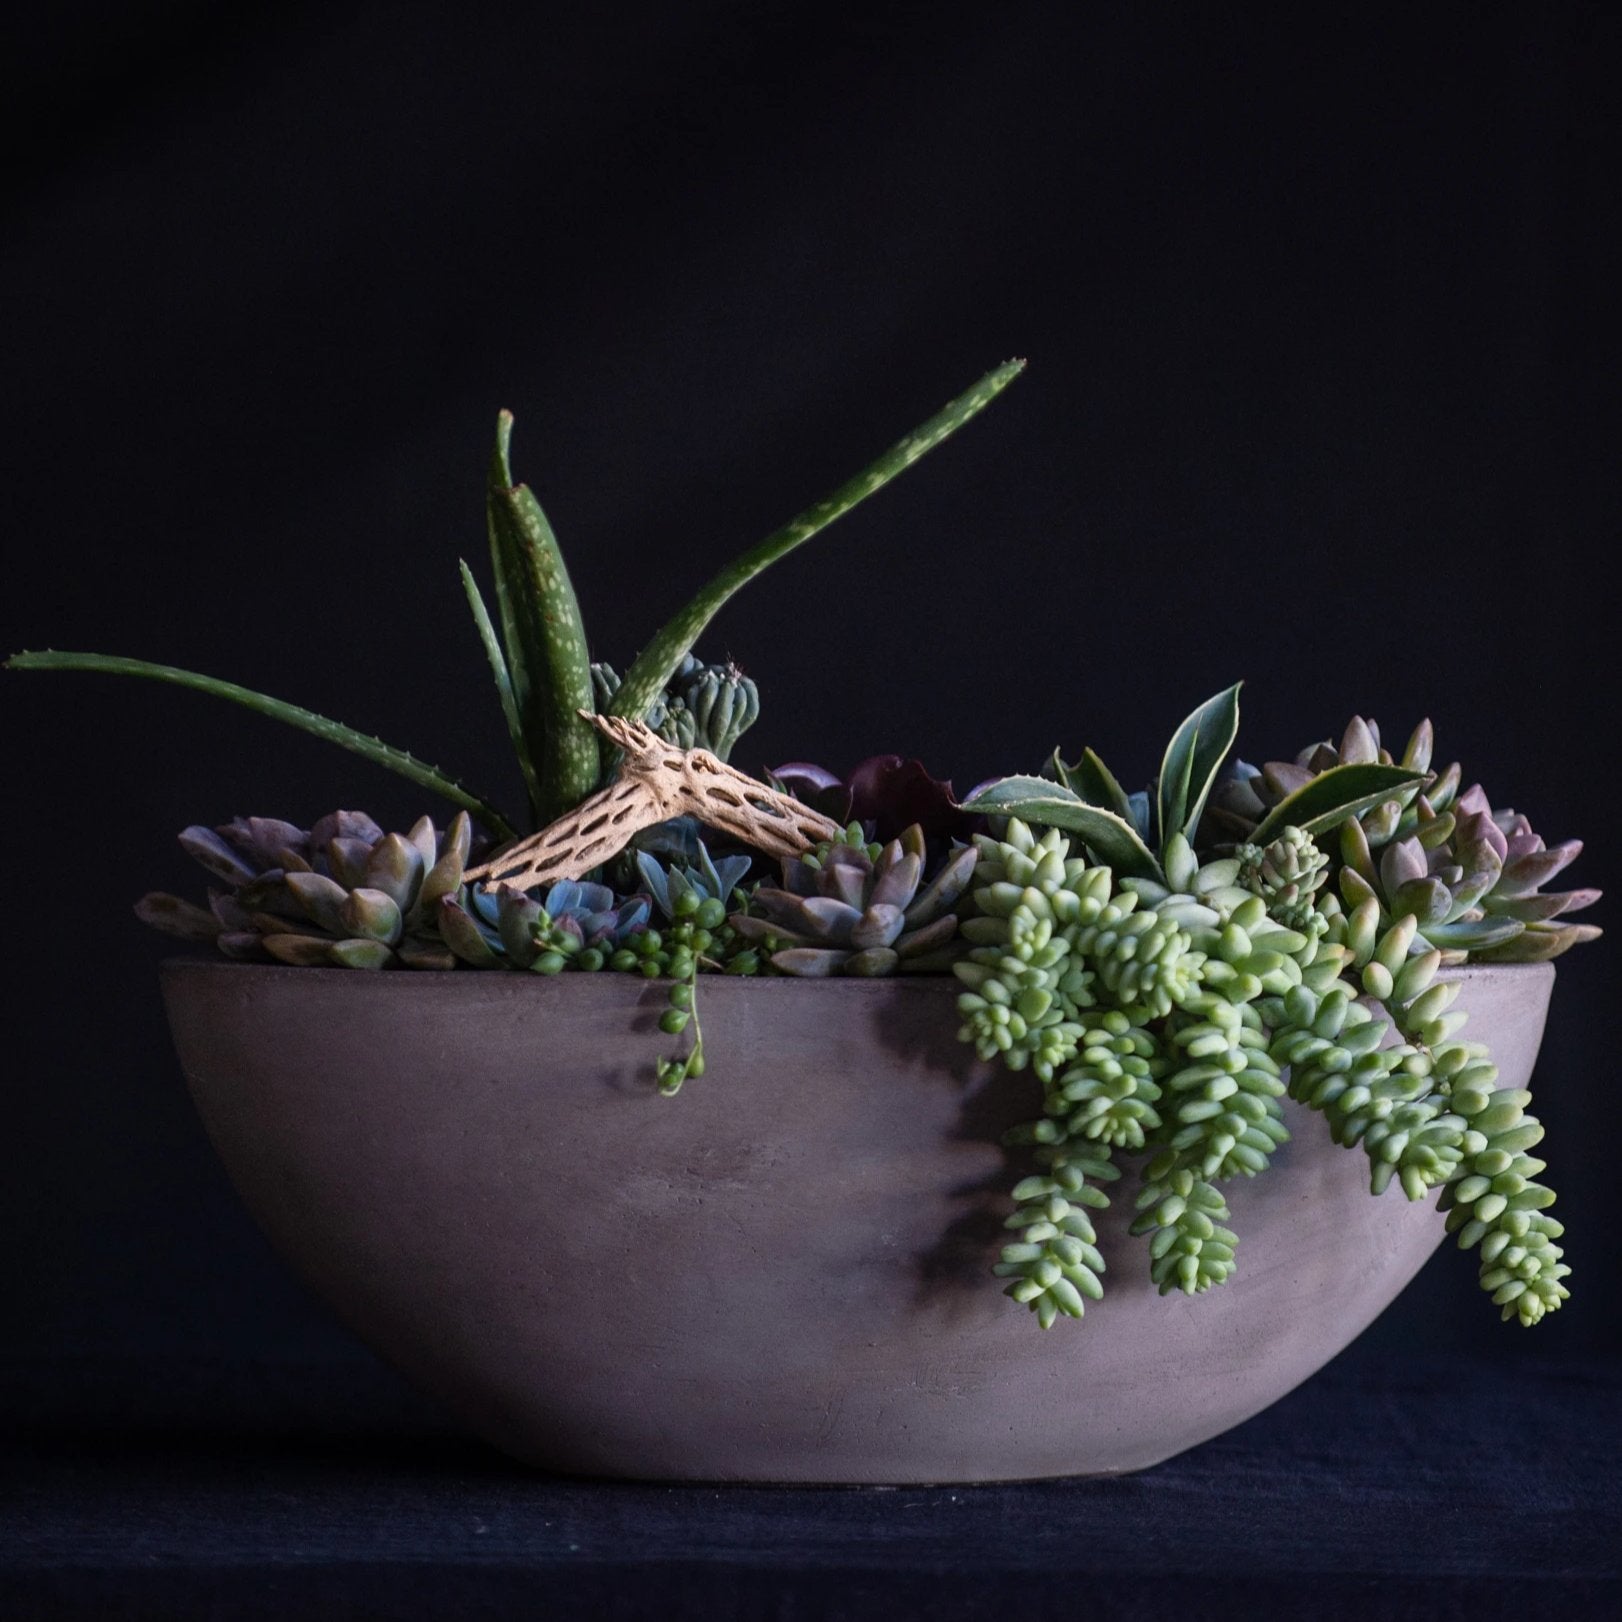 Succulents and cactus planted in a ceramic boat vessel finished with a cholla branch.